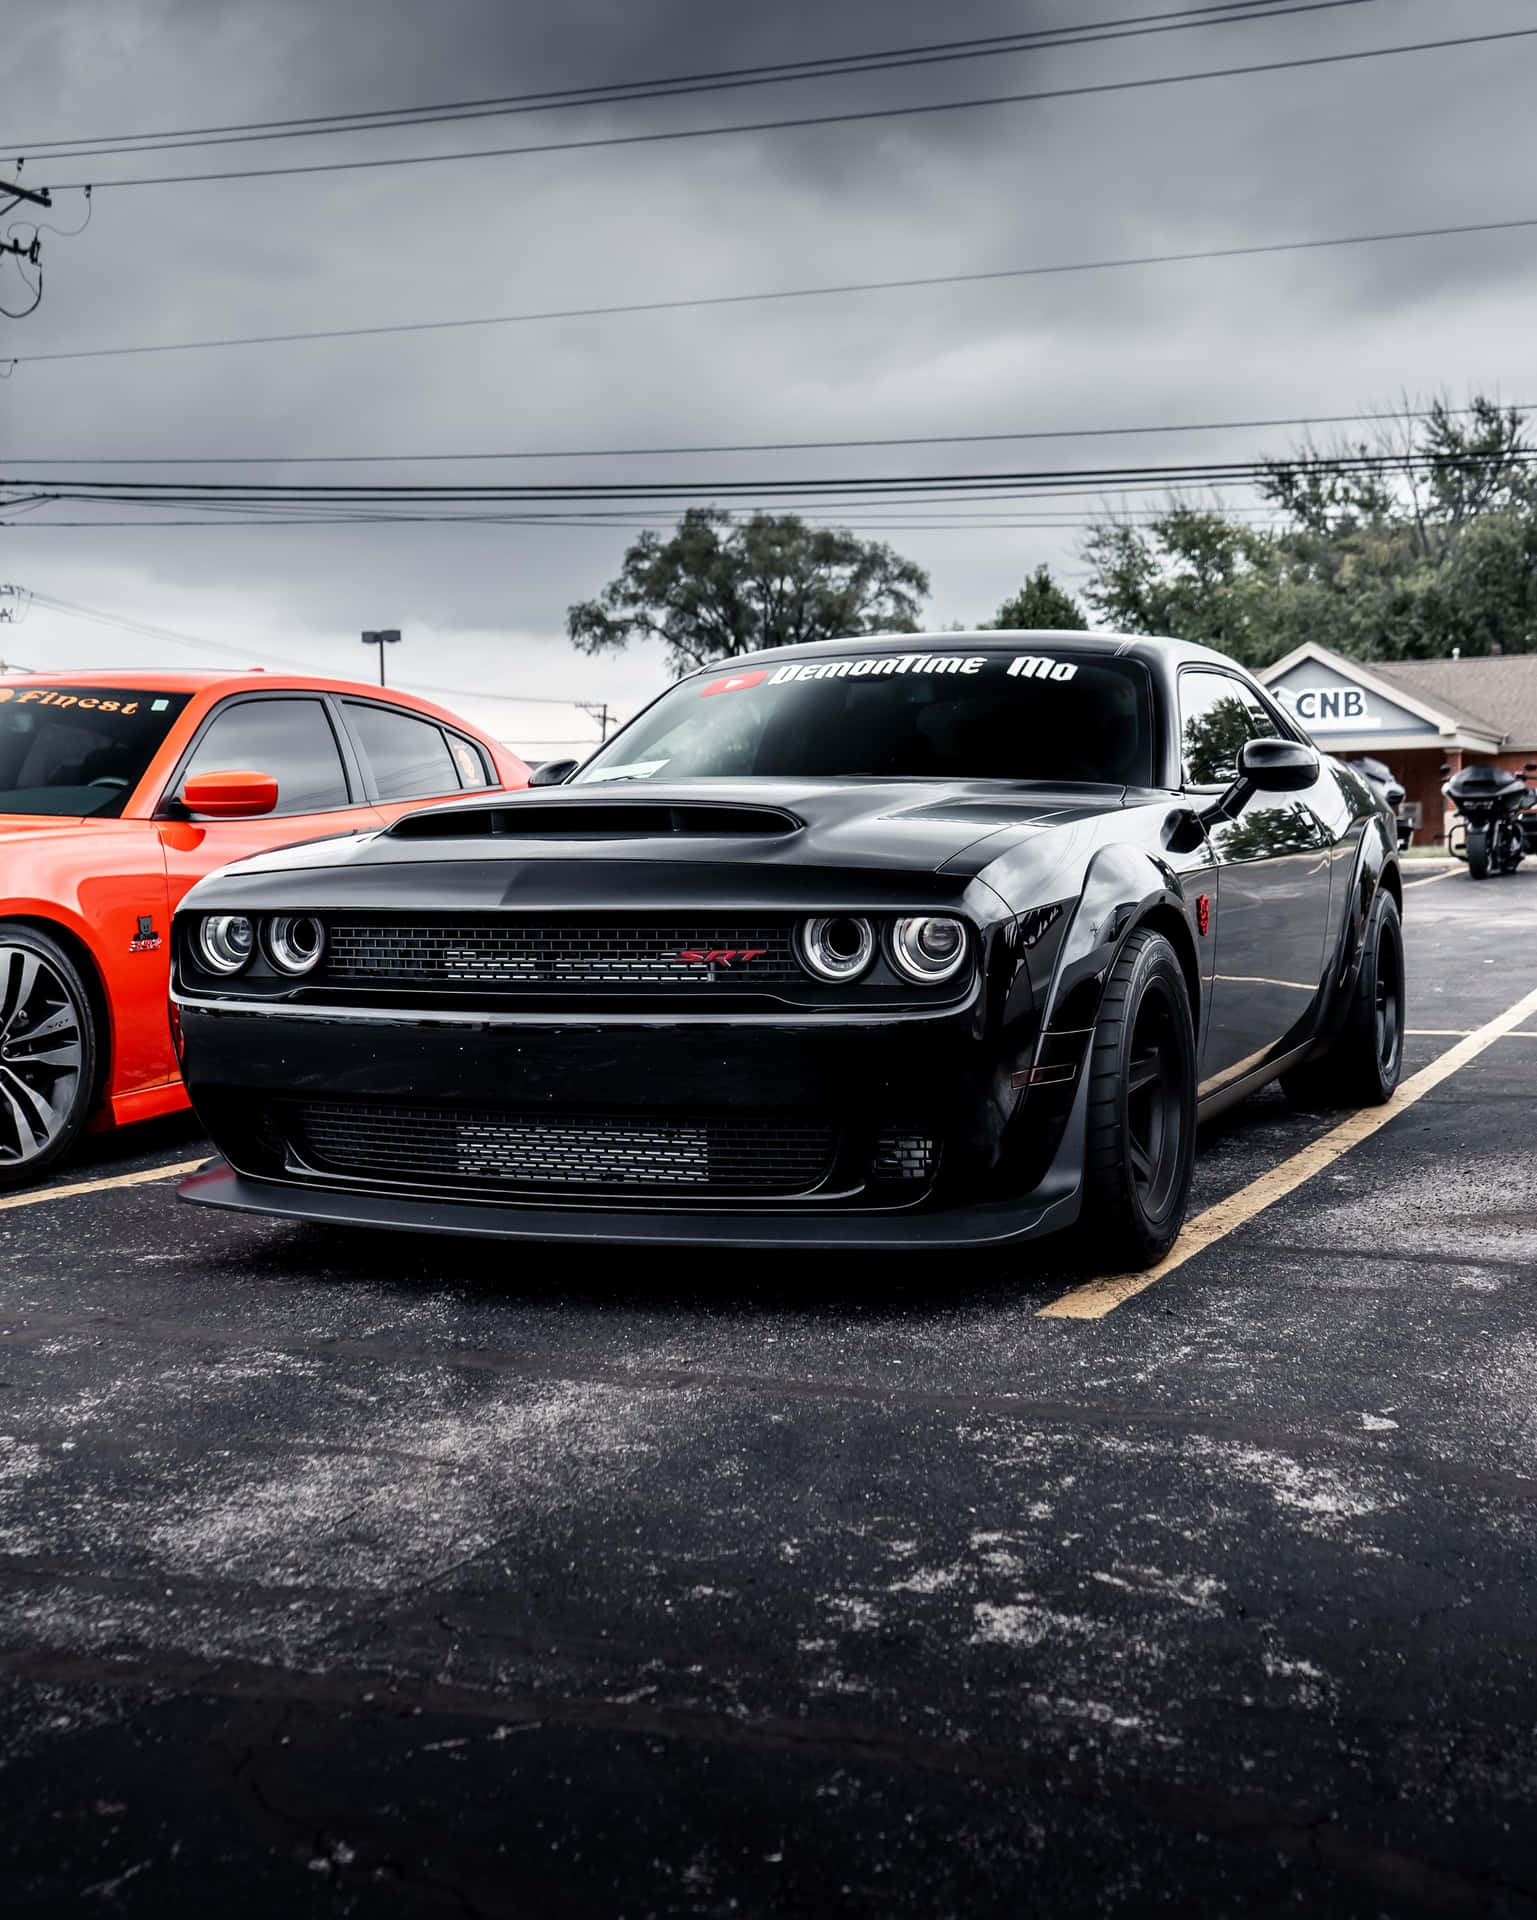 The iconic Dodge Challenger and Charger